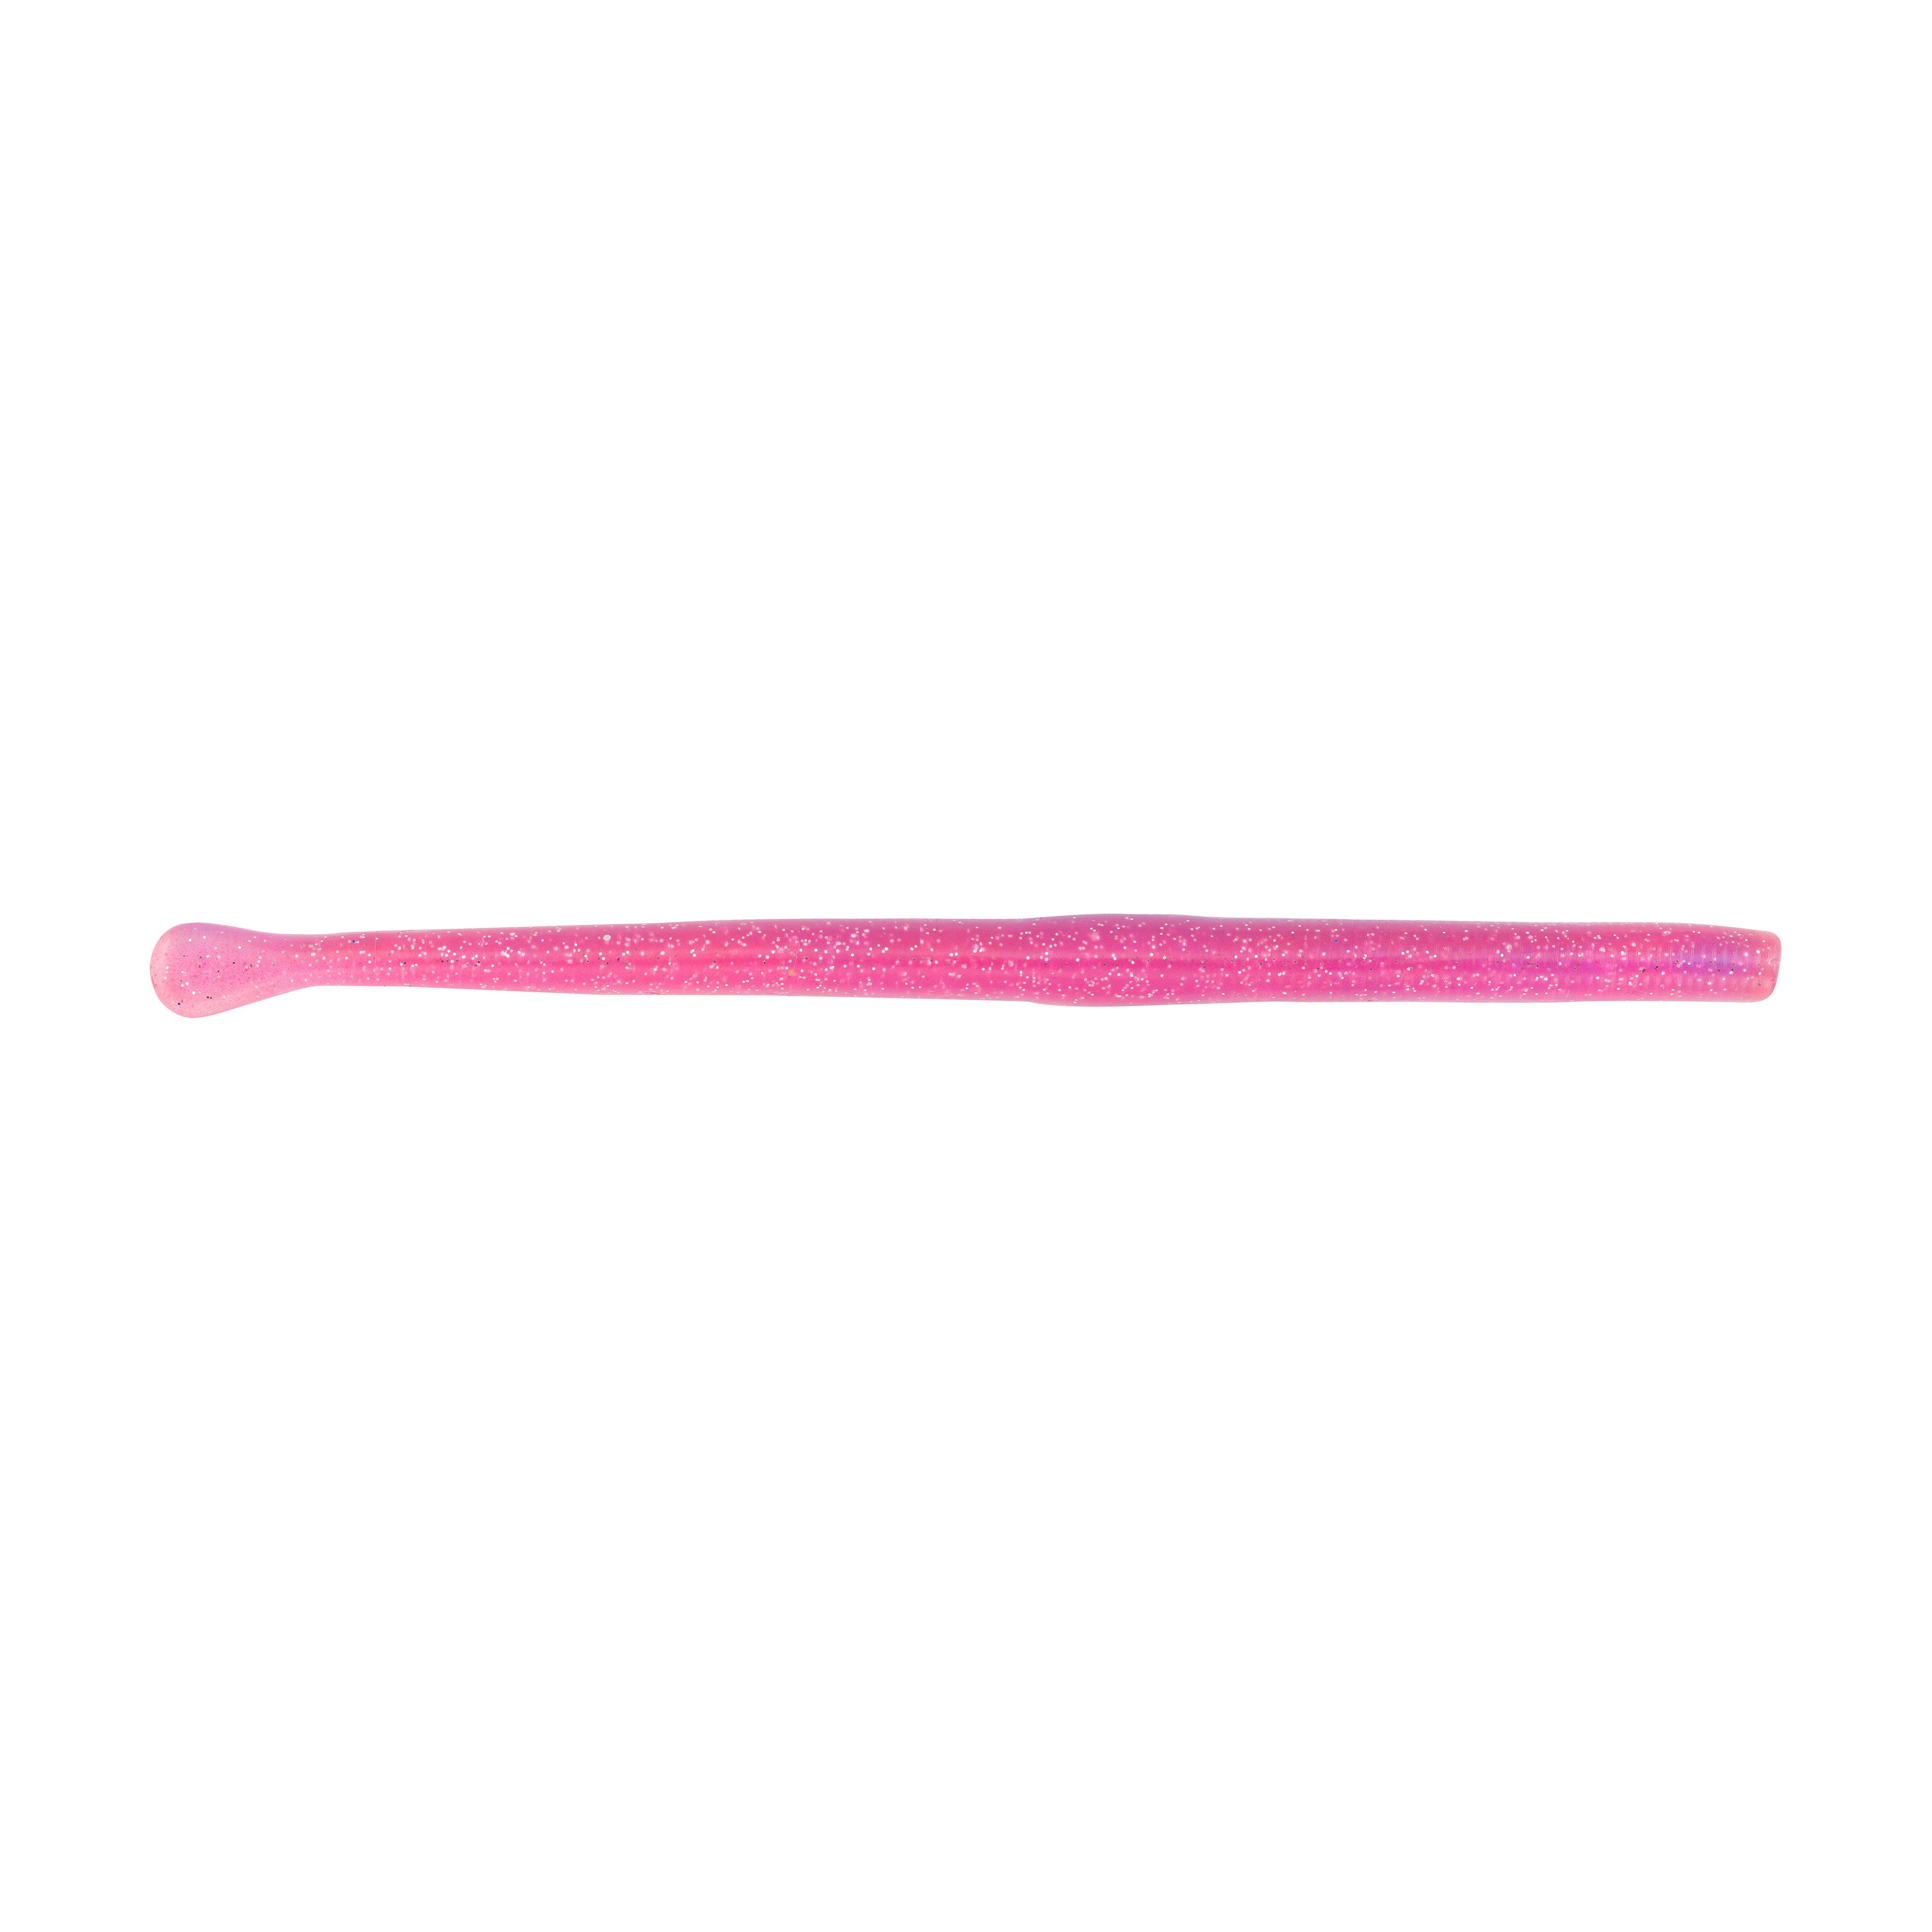 Cheap Soft Plastic Baits – Tagged color:Plum:1509872_Plum_MS – Fisherman's  Factory Outlet